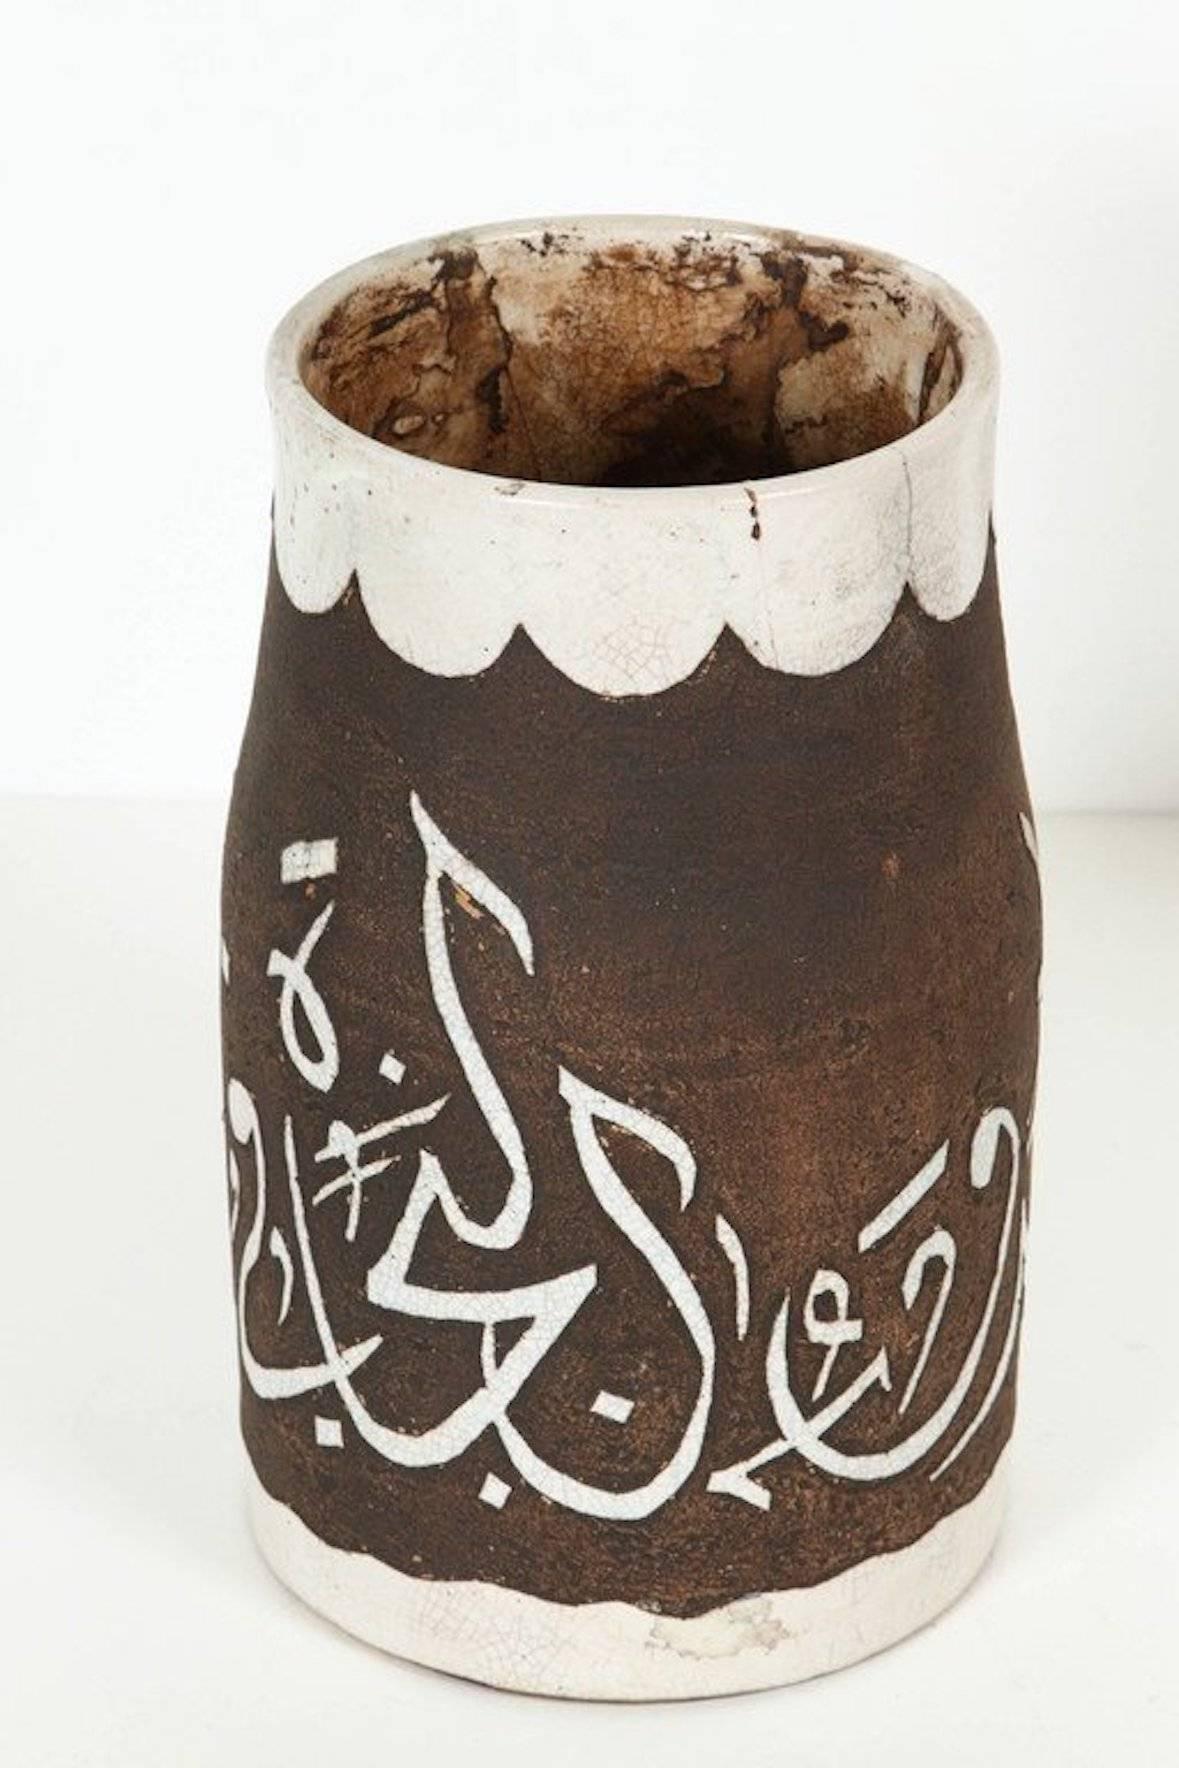 1940s Antique Brown and Ivory Hand-Crafted Moroccan Ceramic Vase.Very decorative chiseled small brown and ivory cor ceramic handcrafted by artisans in Fez Morocco.Hand-graved etched ceramic with ivory Arabic poetry calligraphy.Mouth opening is 5